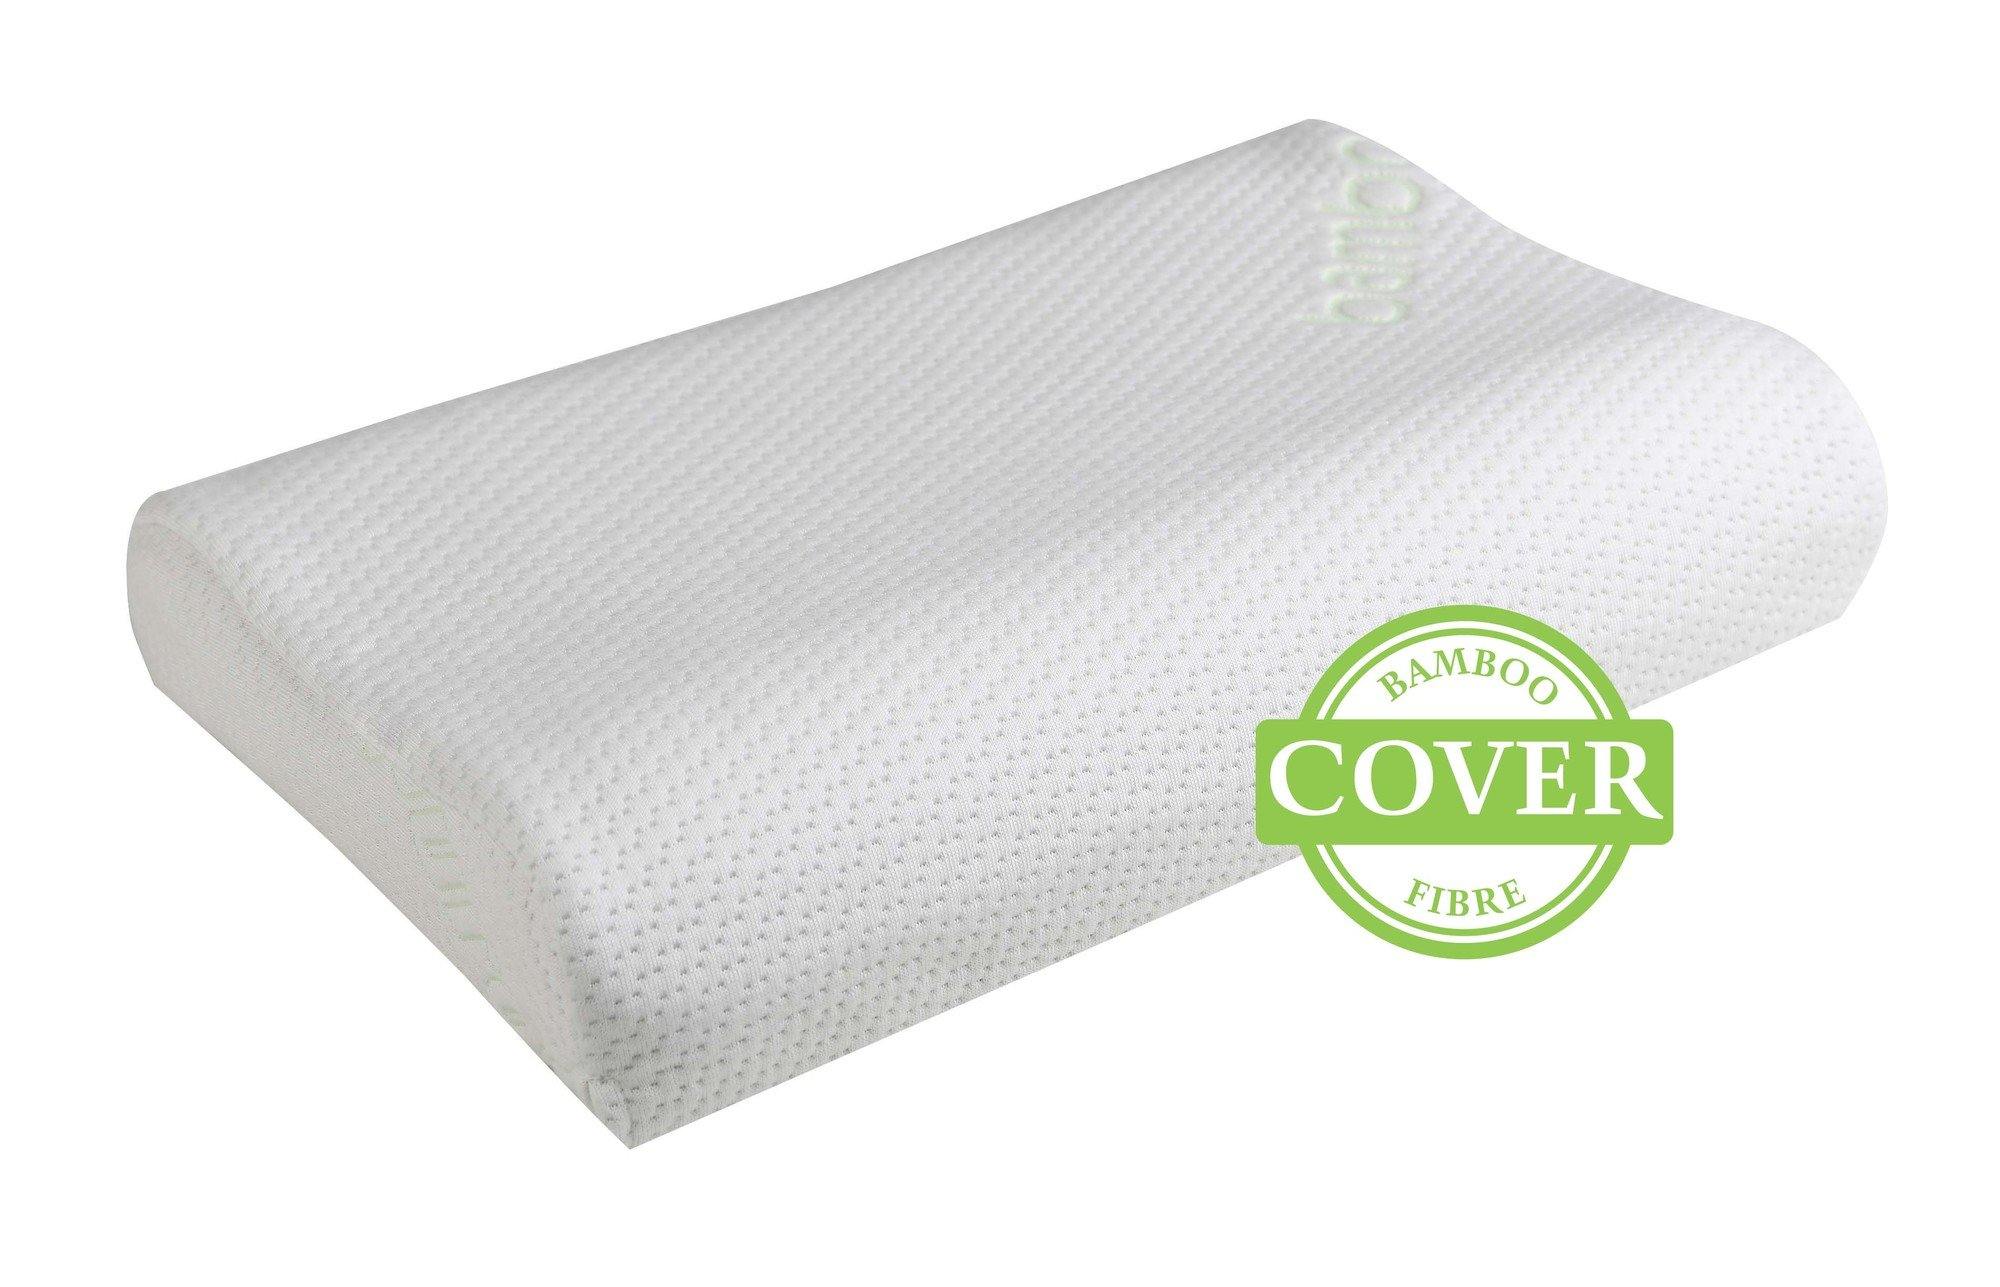 Comfy Baby Adjustable Pillow Cover - Fravi Sdn Bhd (Bebehaus) 562119-D